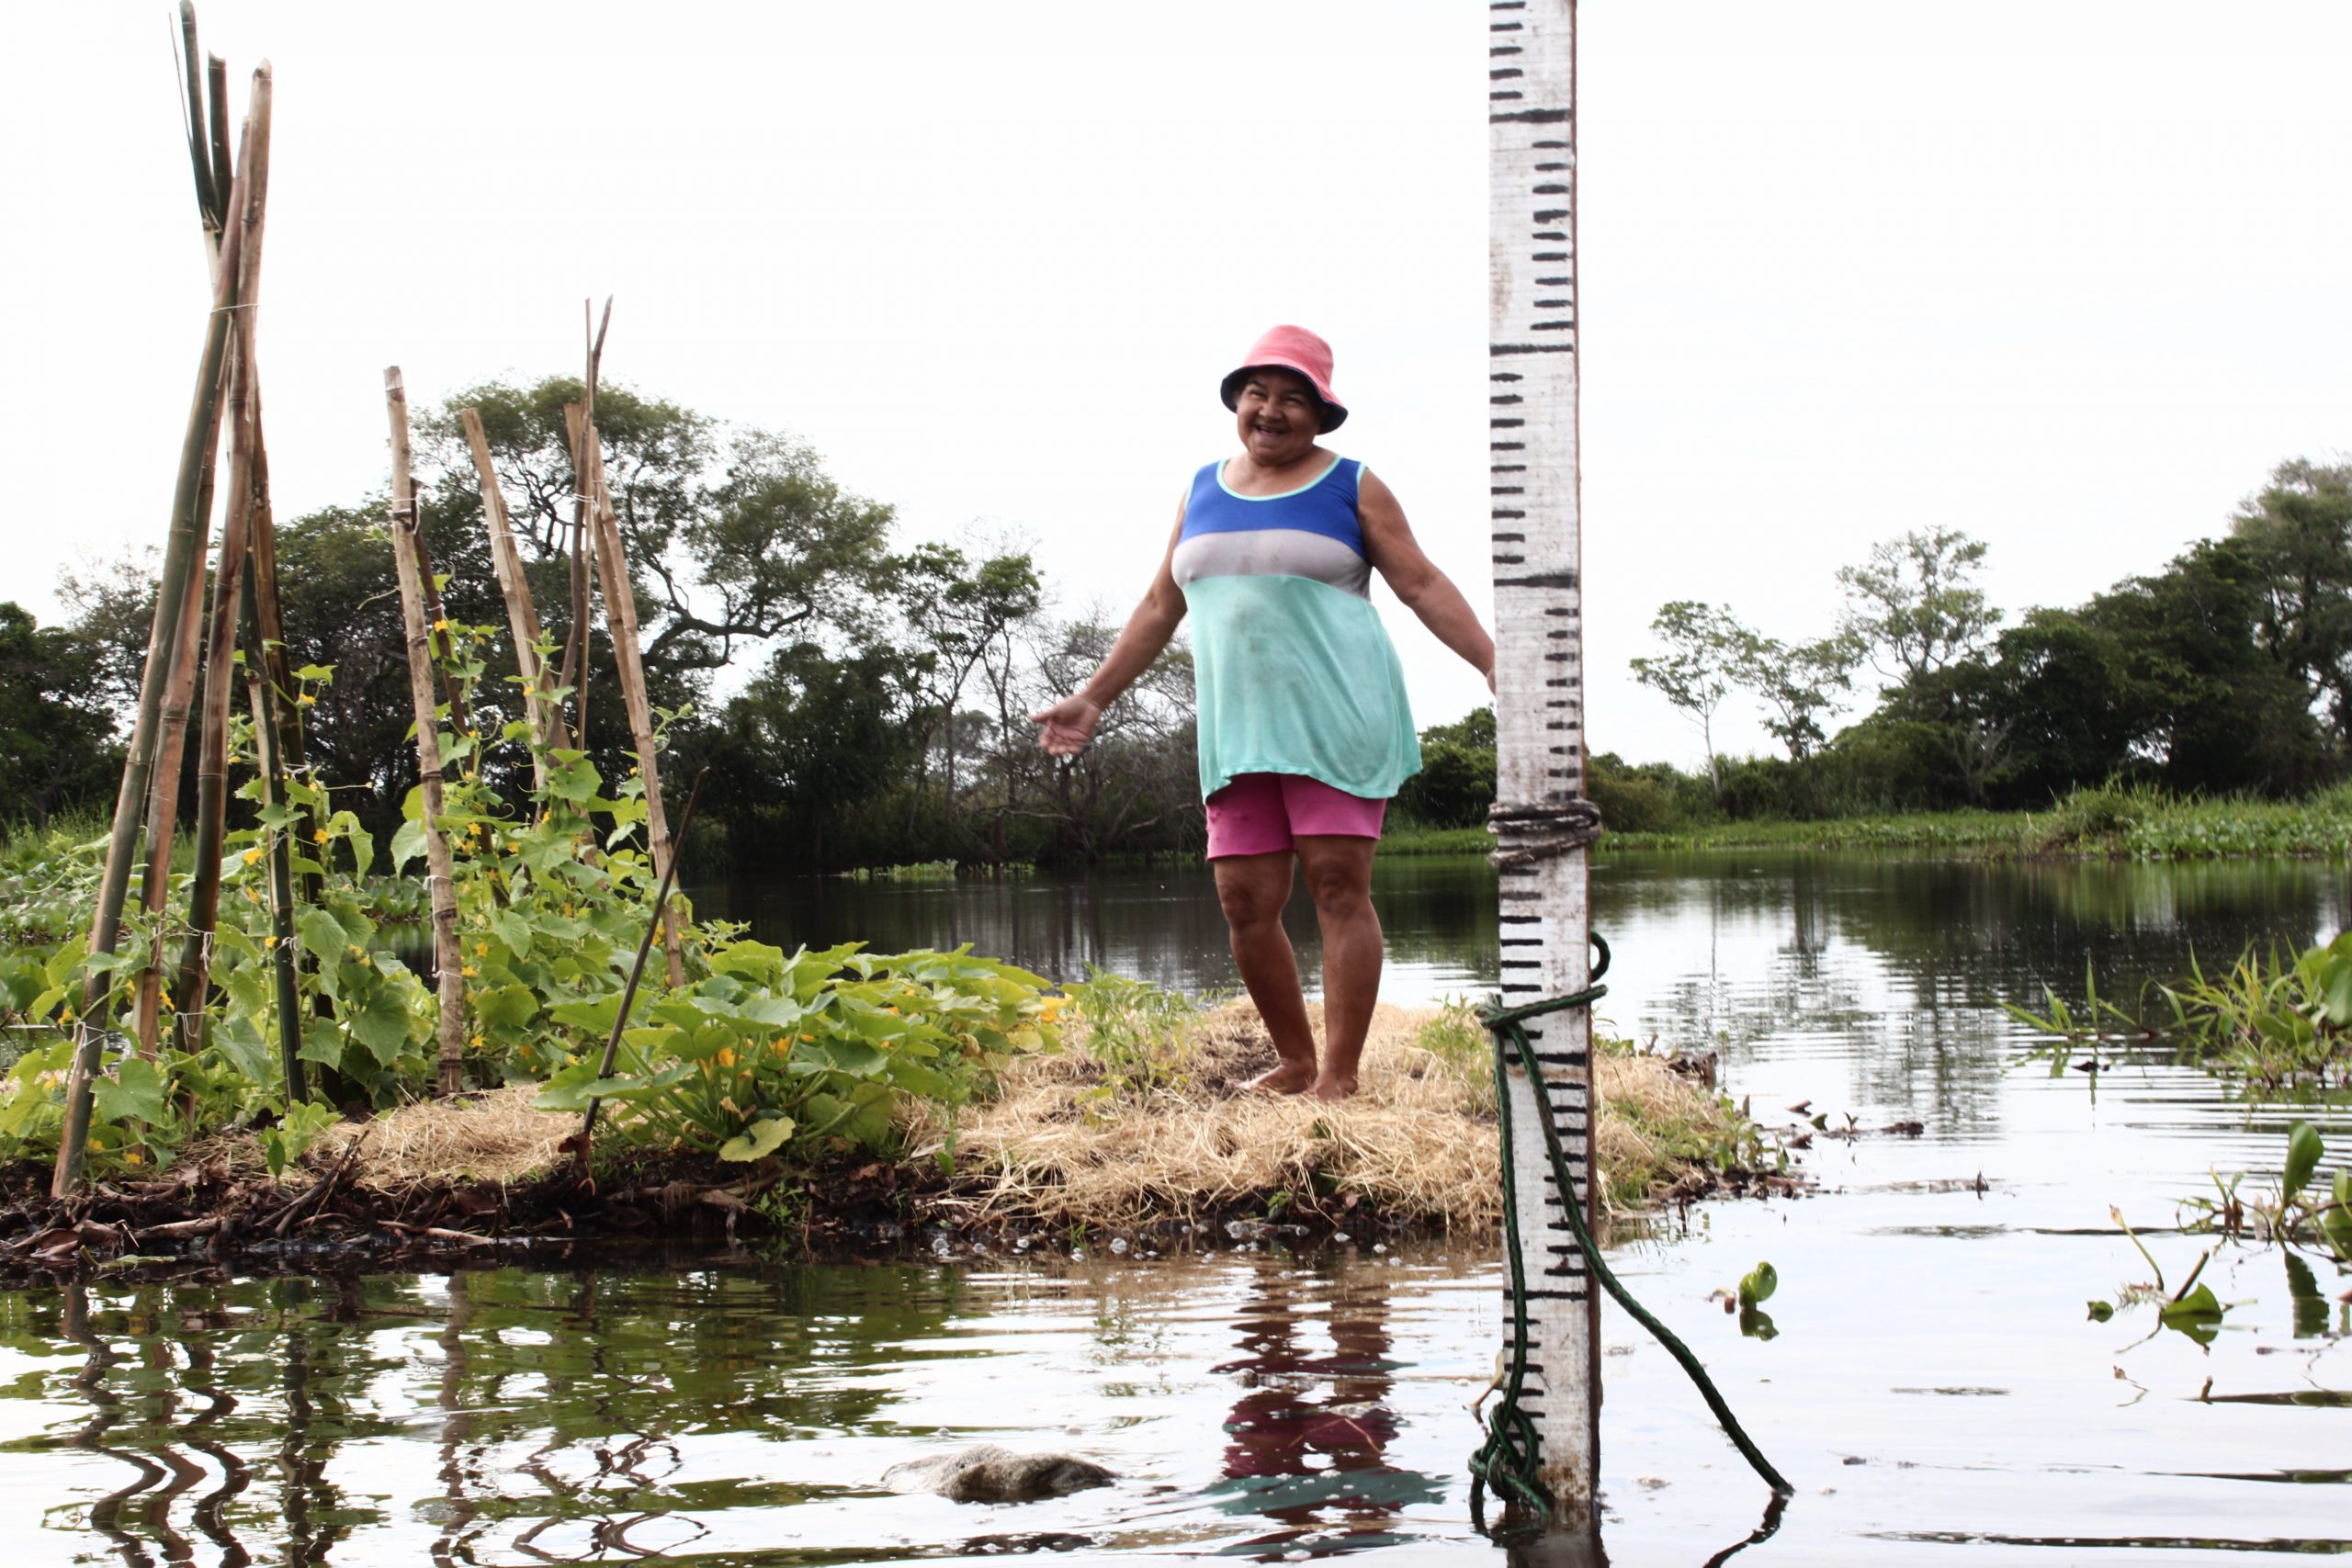 ACDI/VOCA project participant Maria Isabel Benitez showing off her floating garden in Paraguay